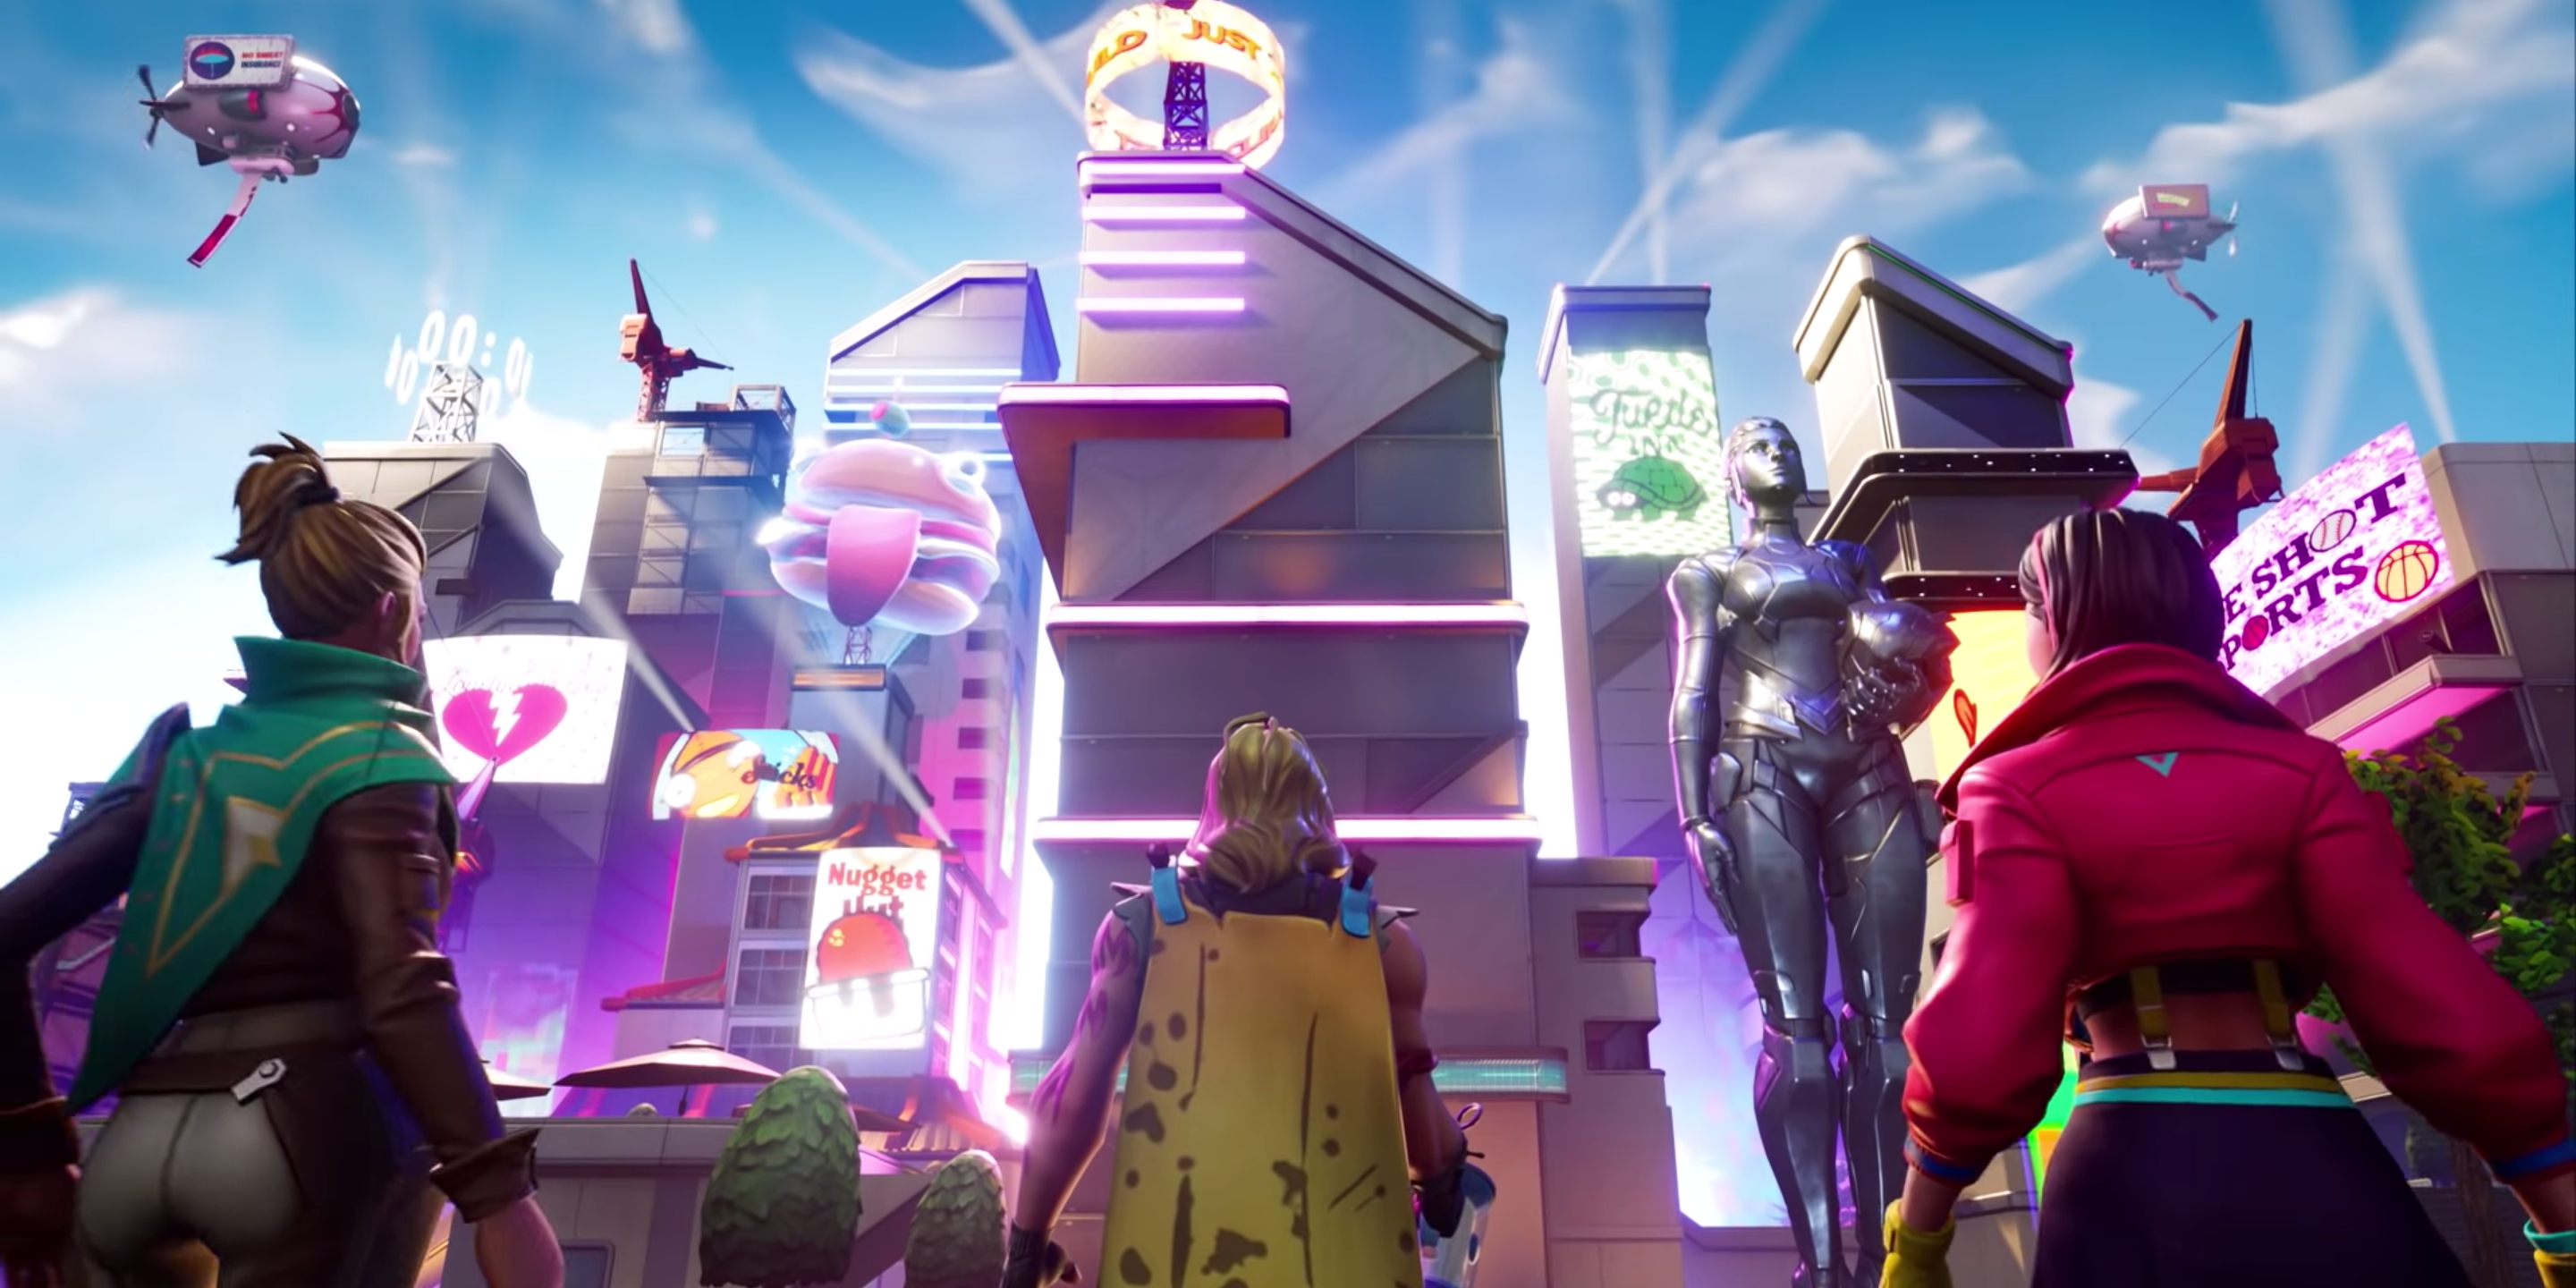 Fortnite Season 9 characters looking at the futuristic map